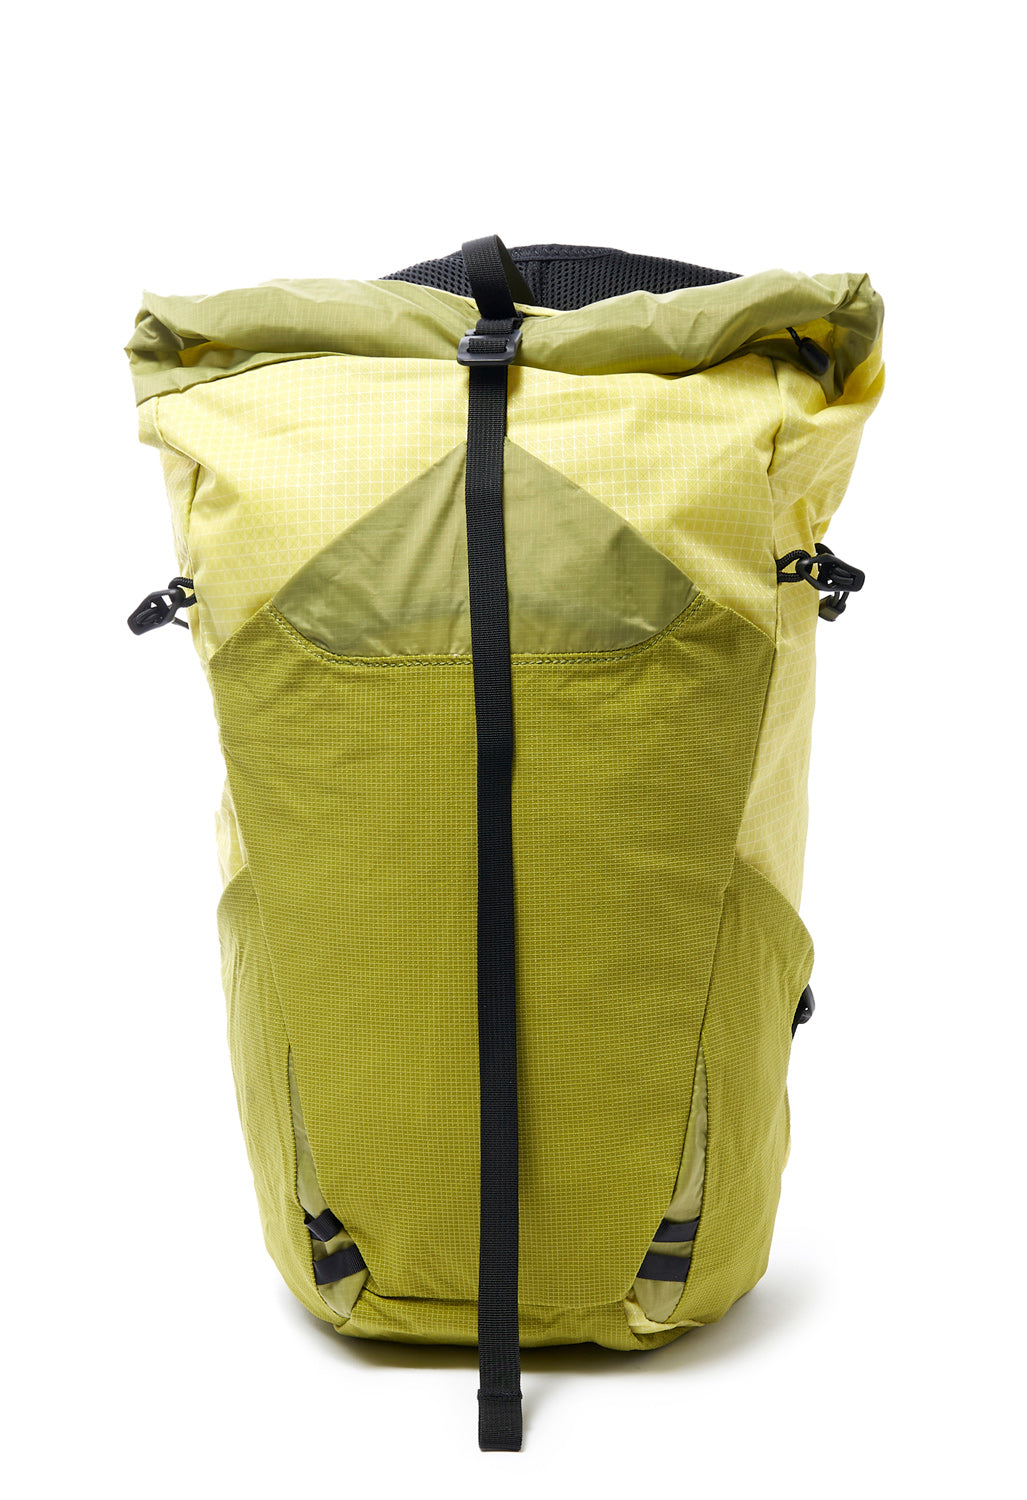 Pa'lante Packs Joey Pack - Daisy Gridstop / Lichen Uhmwpe Grid